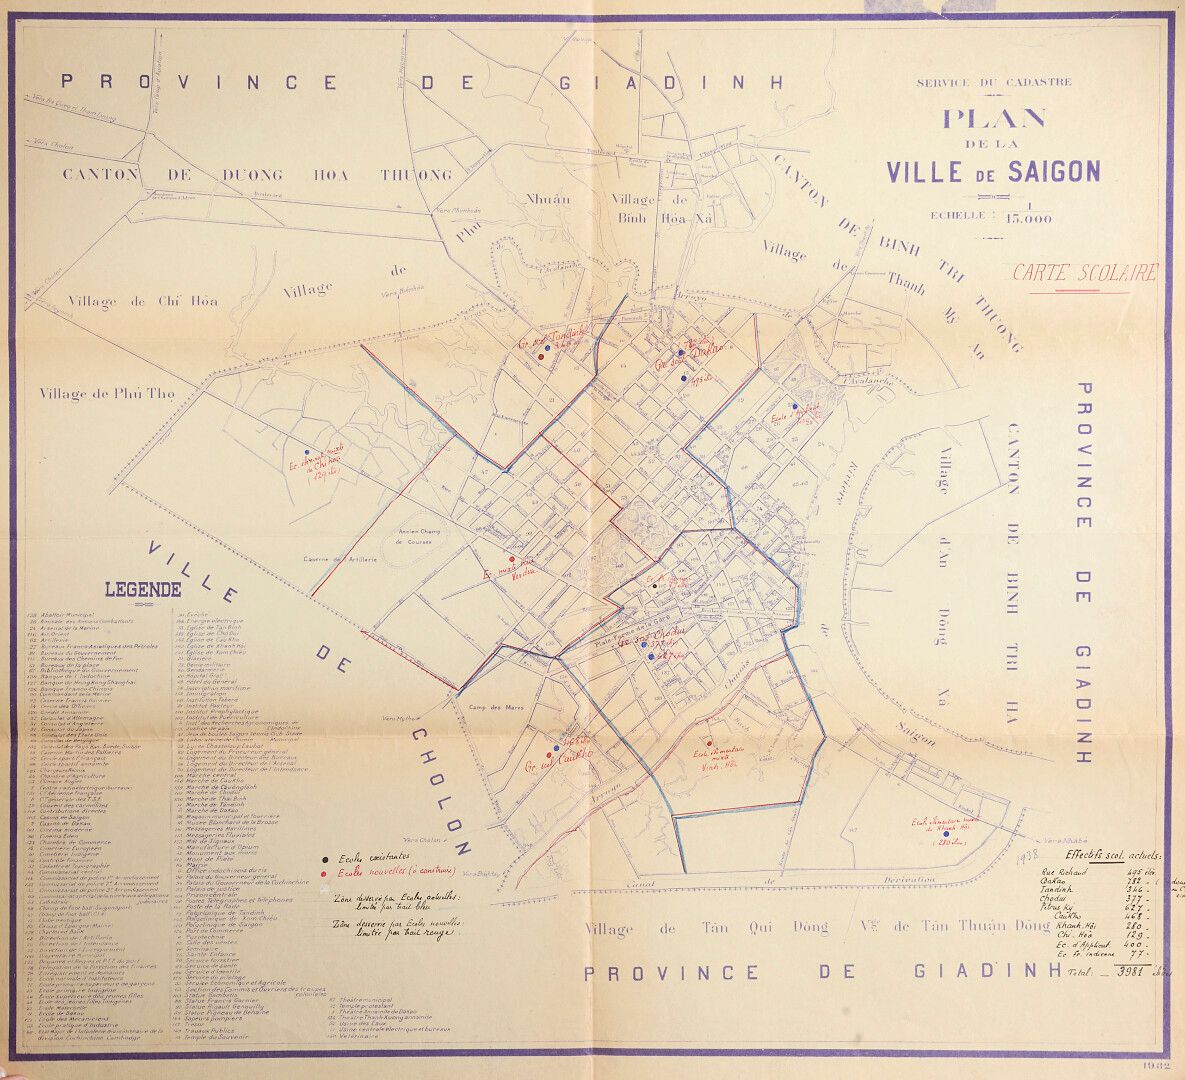 Null 1932. Plans of the city of Saigon published by the Cadastral Service.

- Ma&hellip;